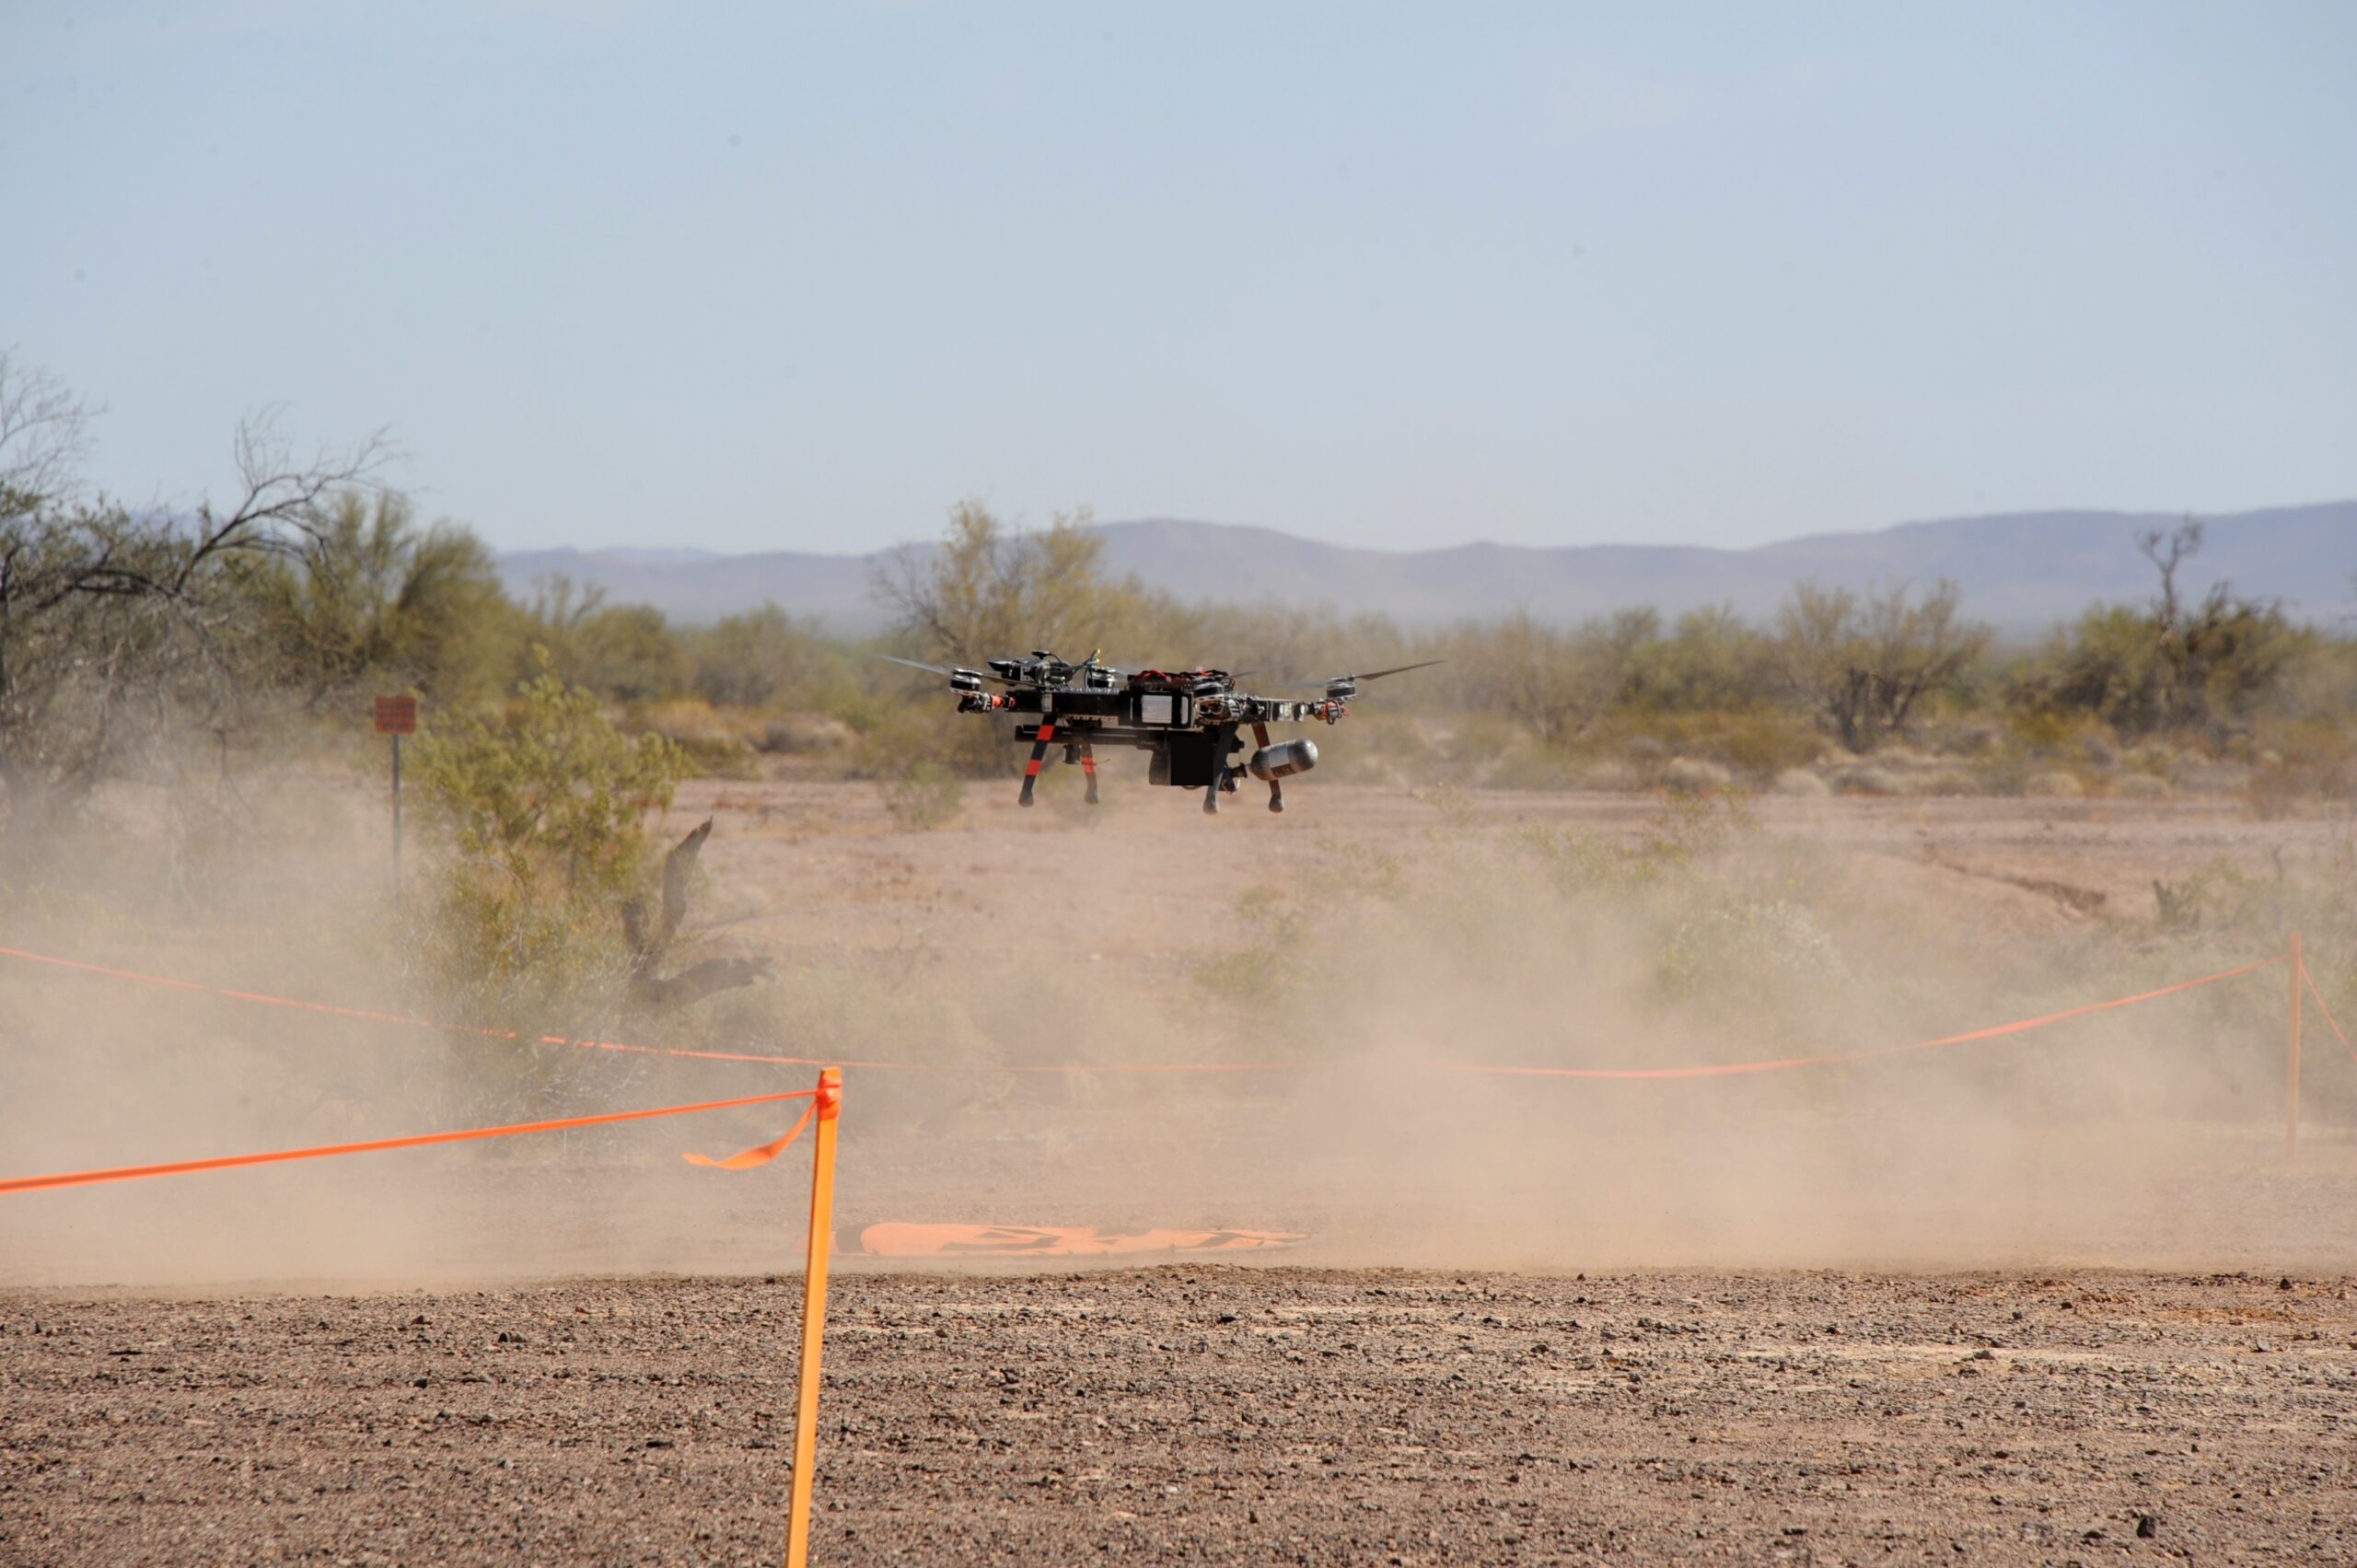 COVID-19, Supply Chain Issues Hampering Pentagon’s Quest To Buy Counter-Drone Tech